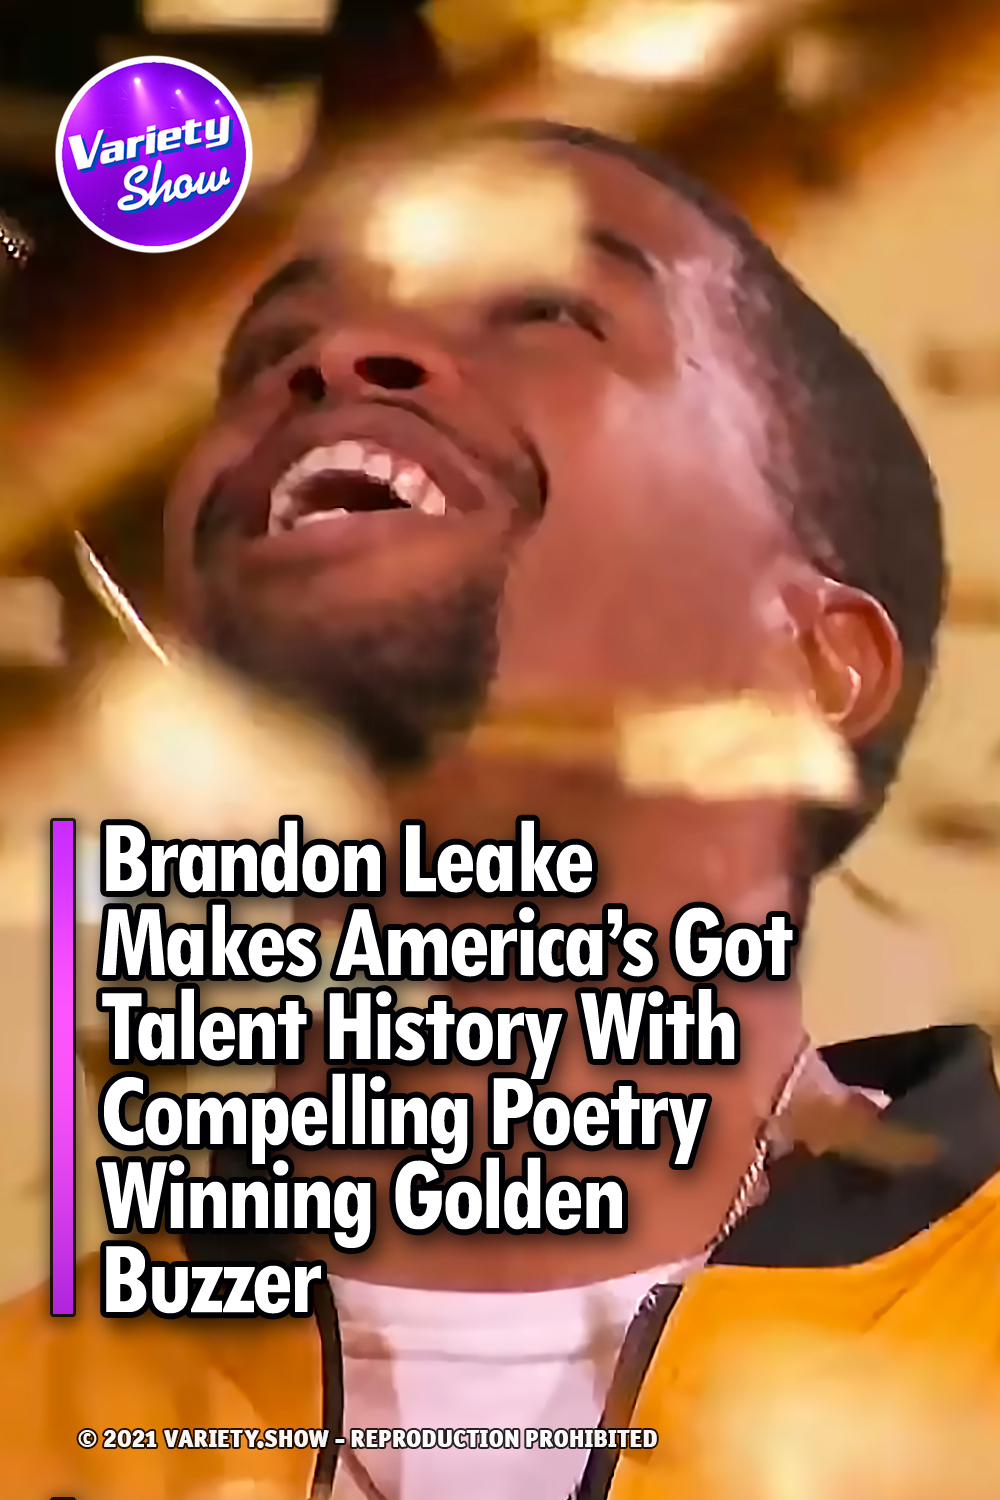 Brandon Leake Makes America’s Got Talent History With Compelling Poetry Winning Golden Buzzer